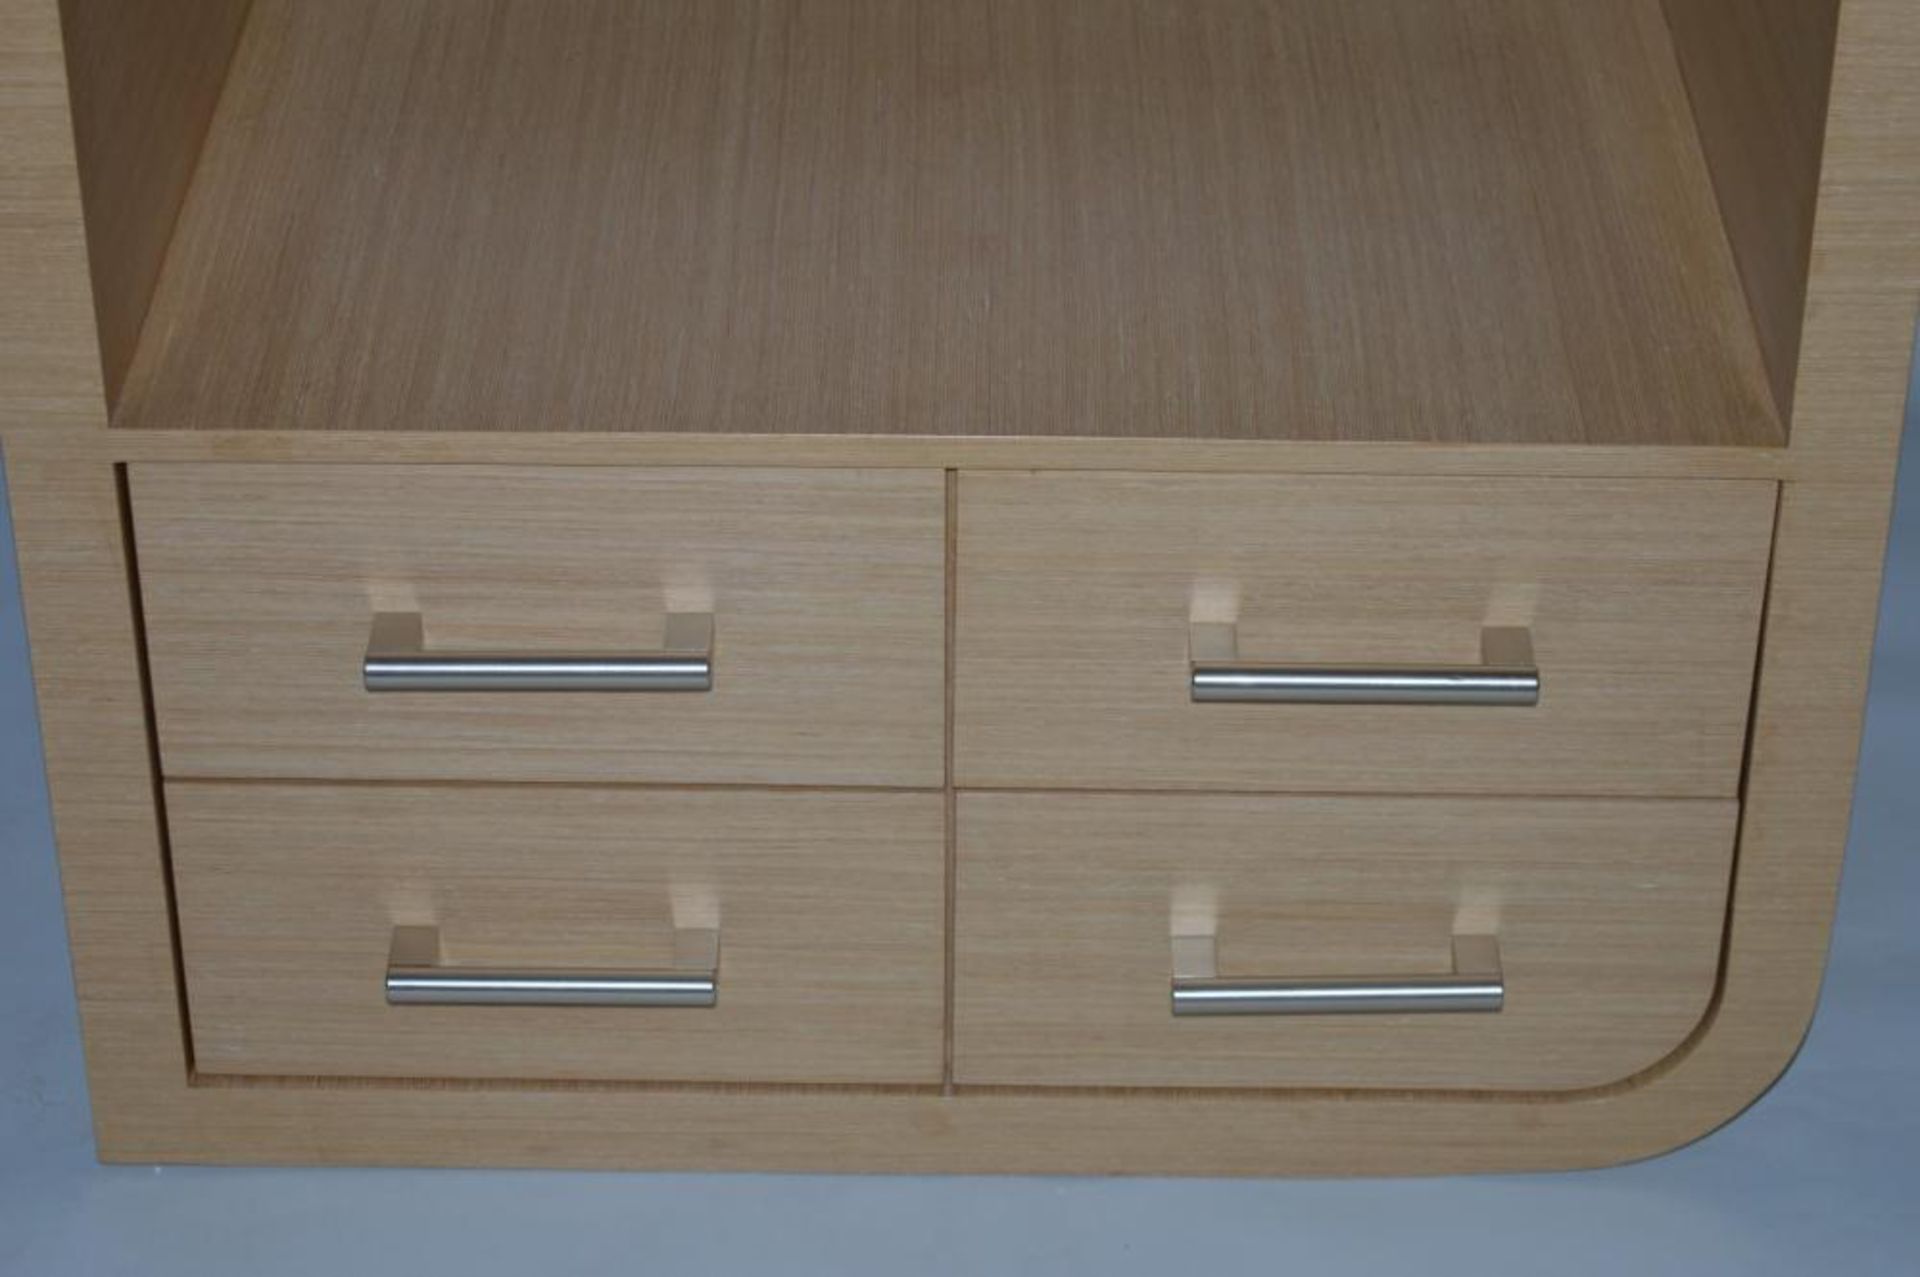 1 x Vogue ARC Series 1 Type C Bathroom VANITY UNIT in LIGHT OAK - 1600mm Width - Manufactured to the - Image 4 of 6